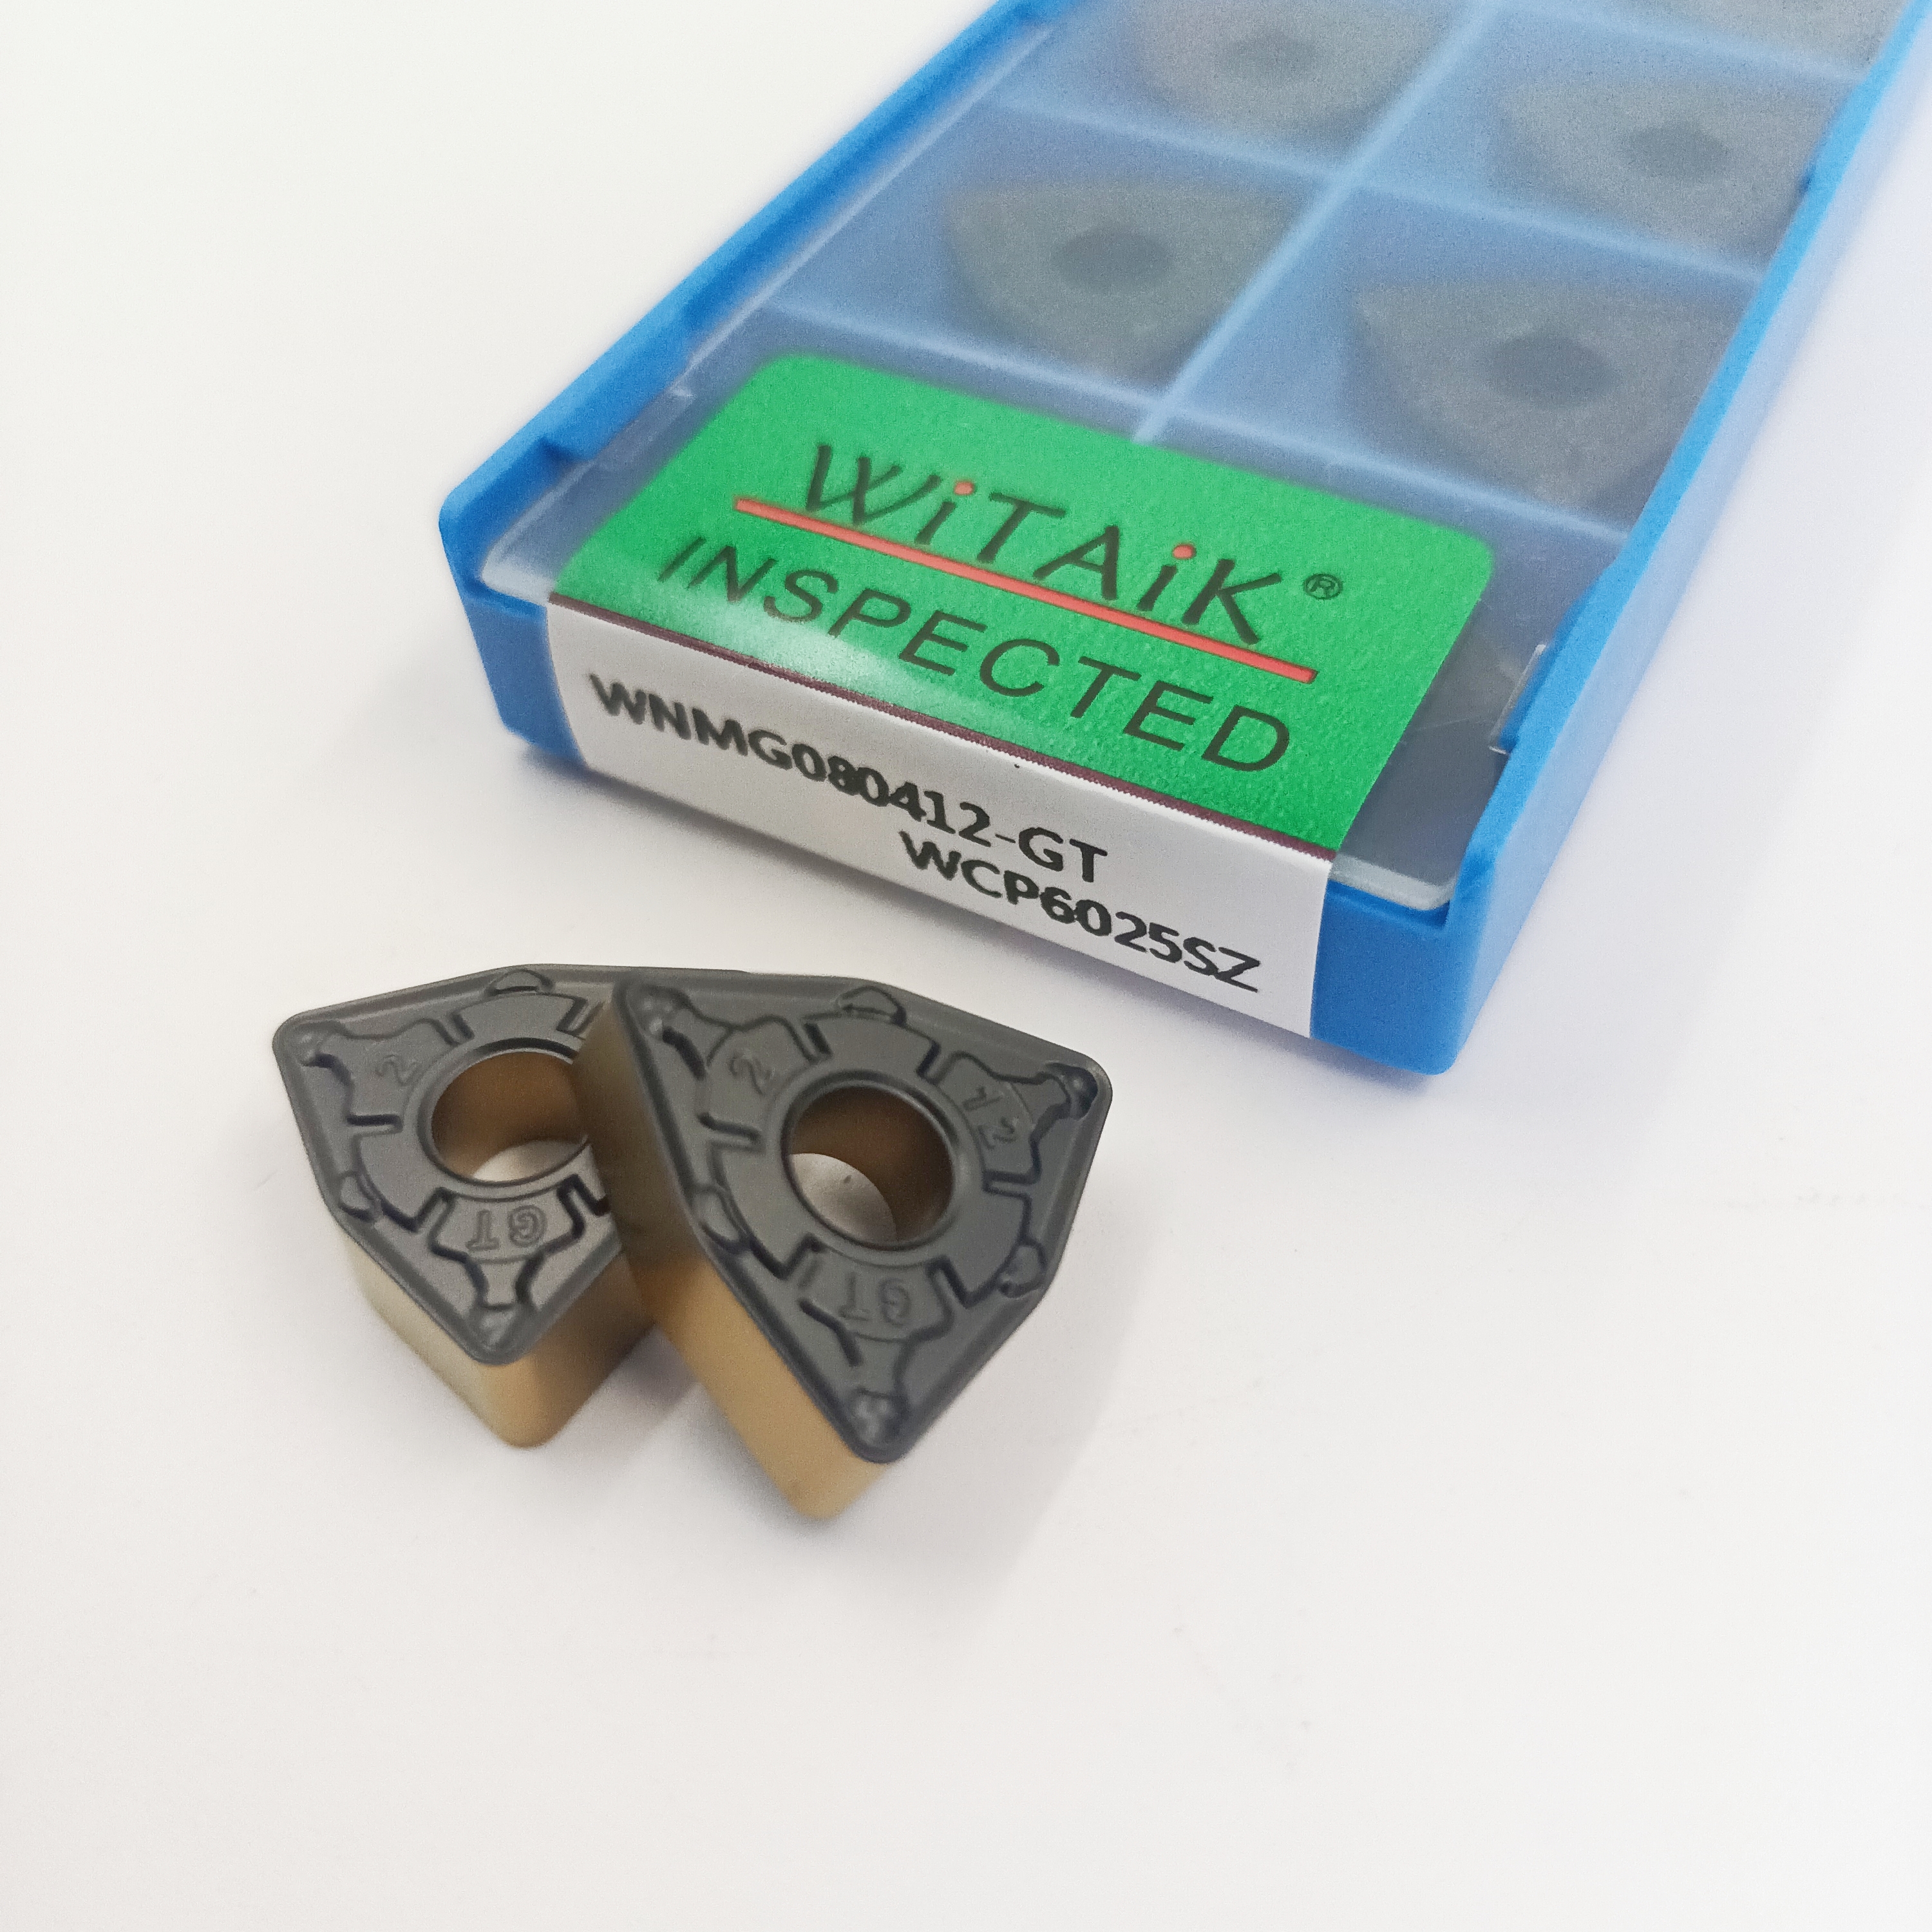 WITAIK High quality WNMG080412-GT WCP6025SZ Steel turning Carbide Inserts